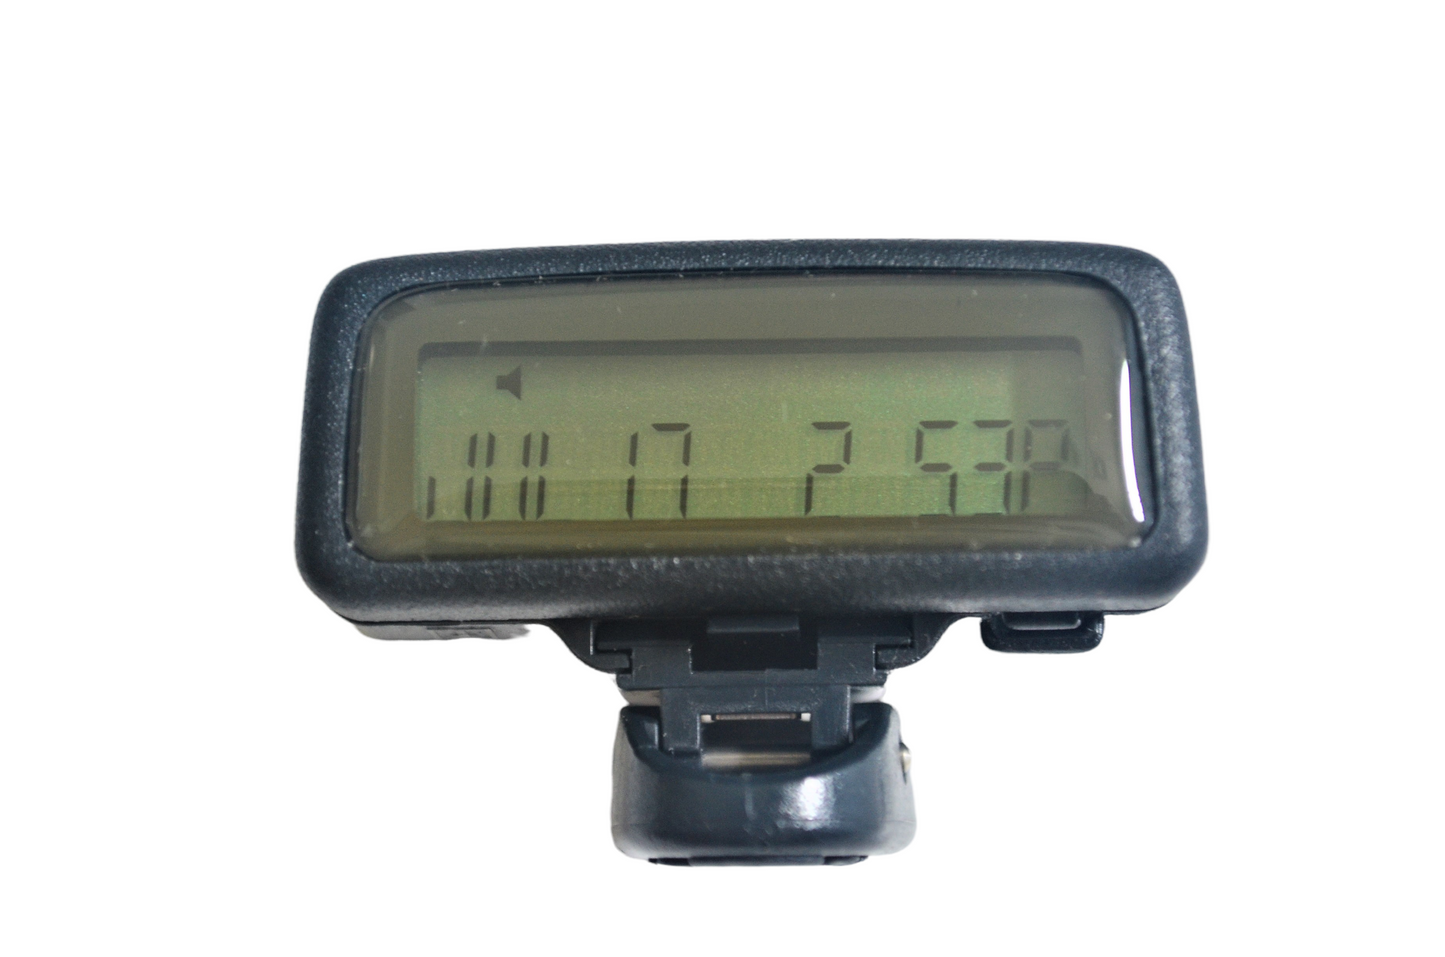 Daviscomms Br501rf 1-Way Numeric Pager (refurbished) with 3-Month Prepaid Service